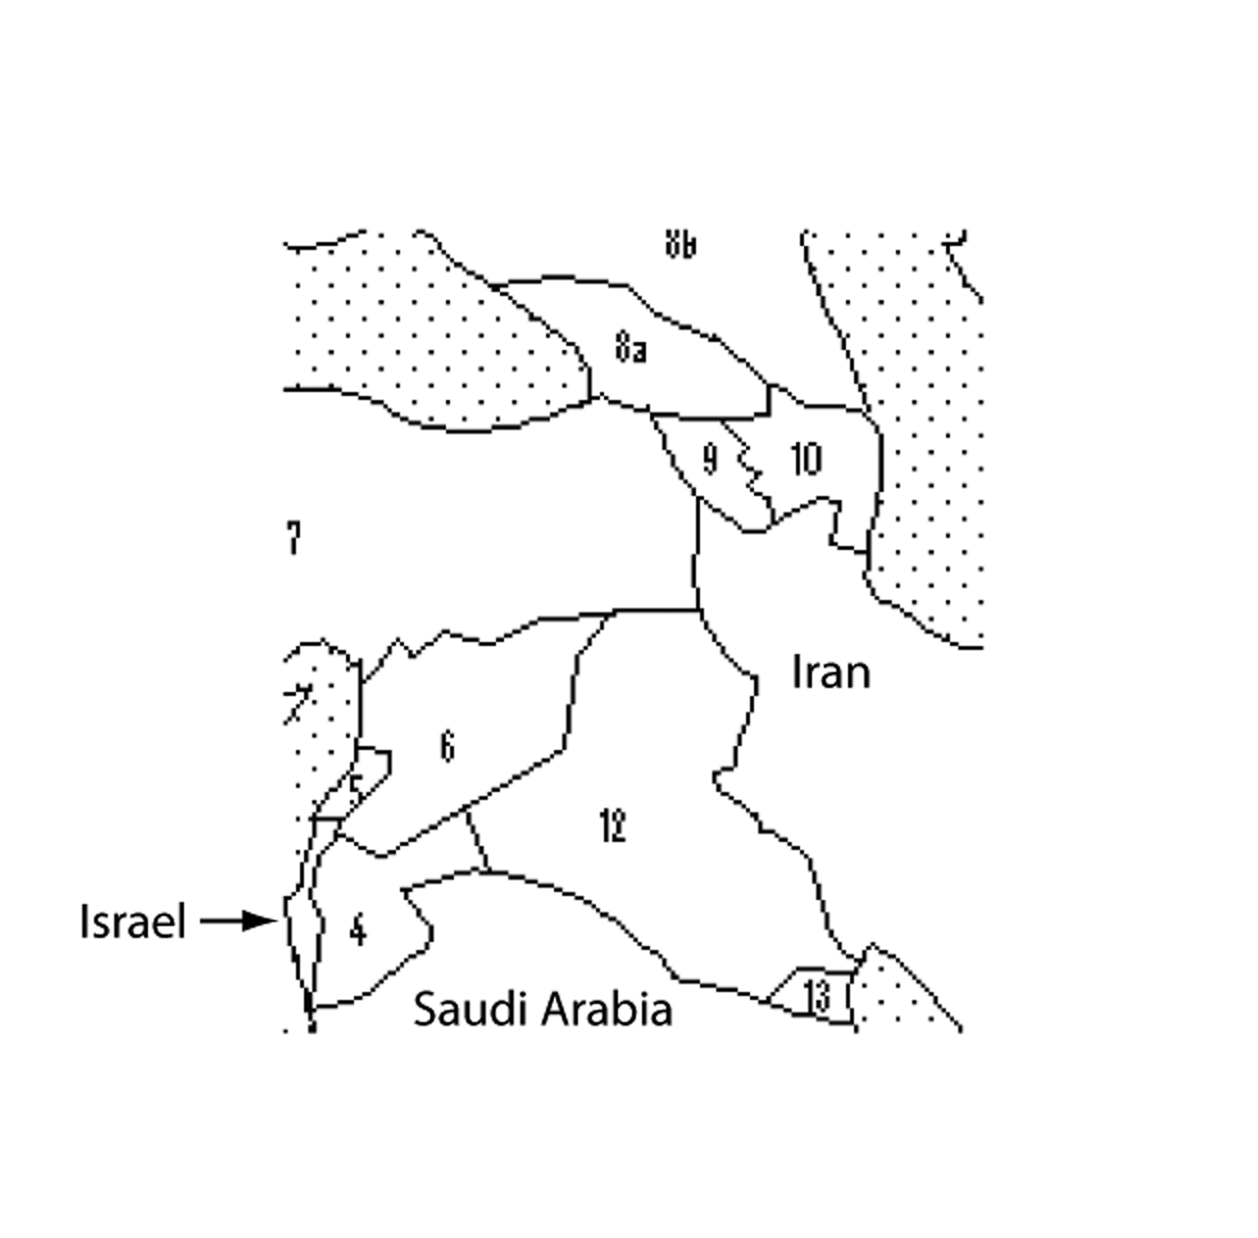 mide%20east%20map%20with%20israel%20label.png